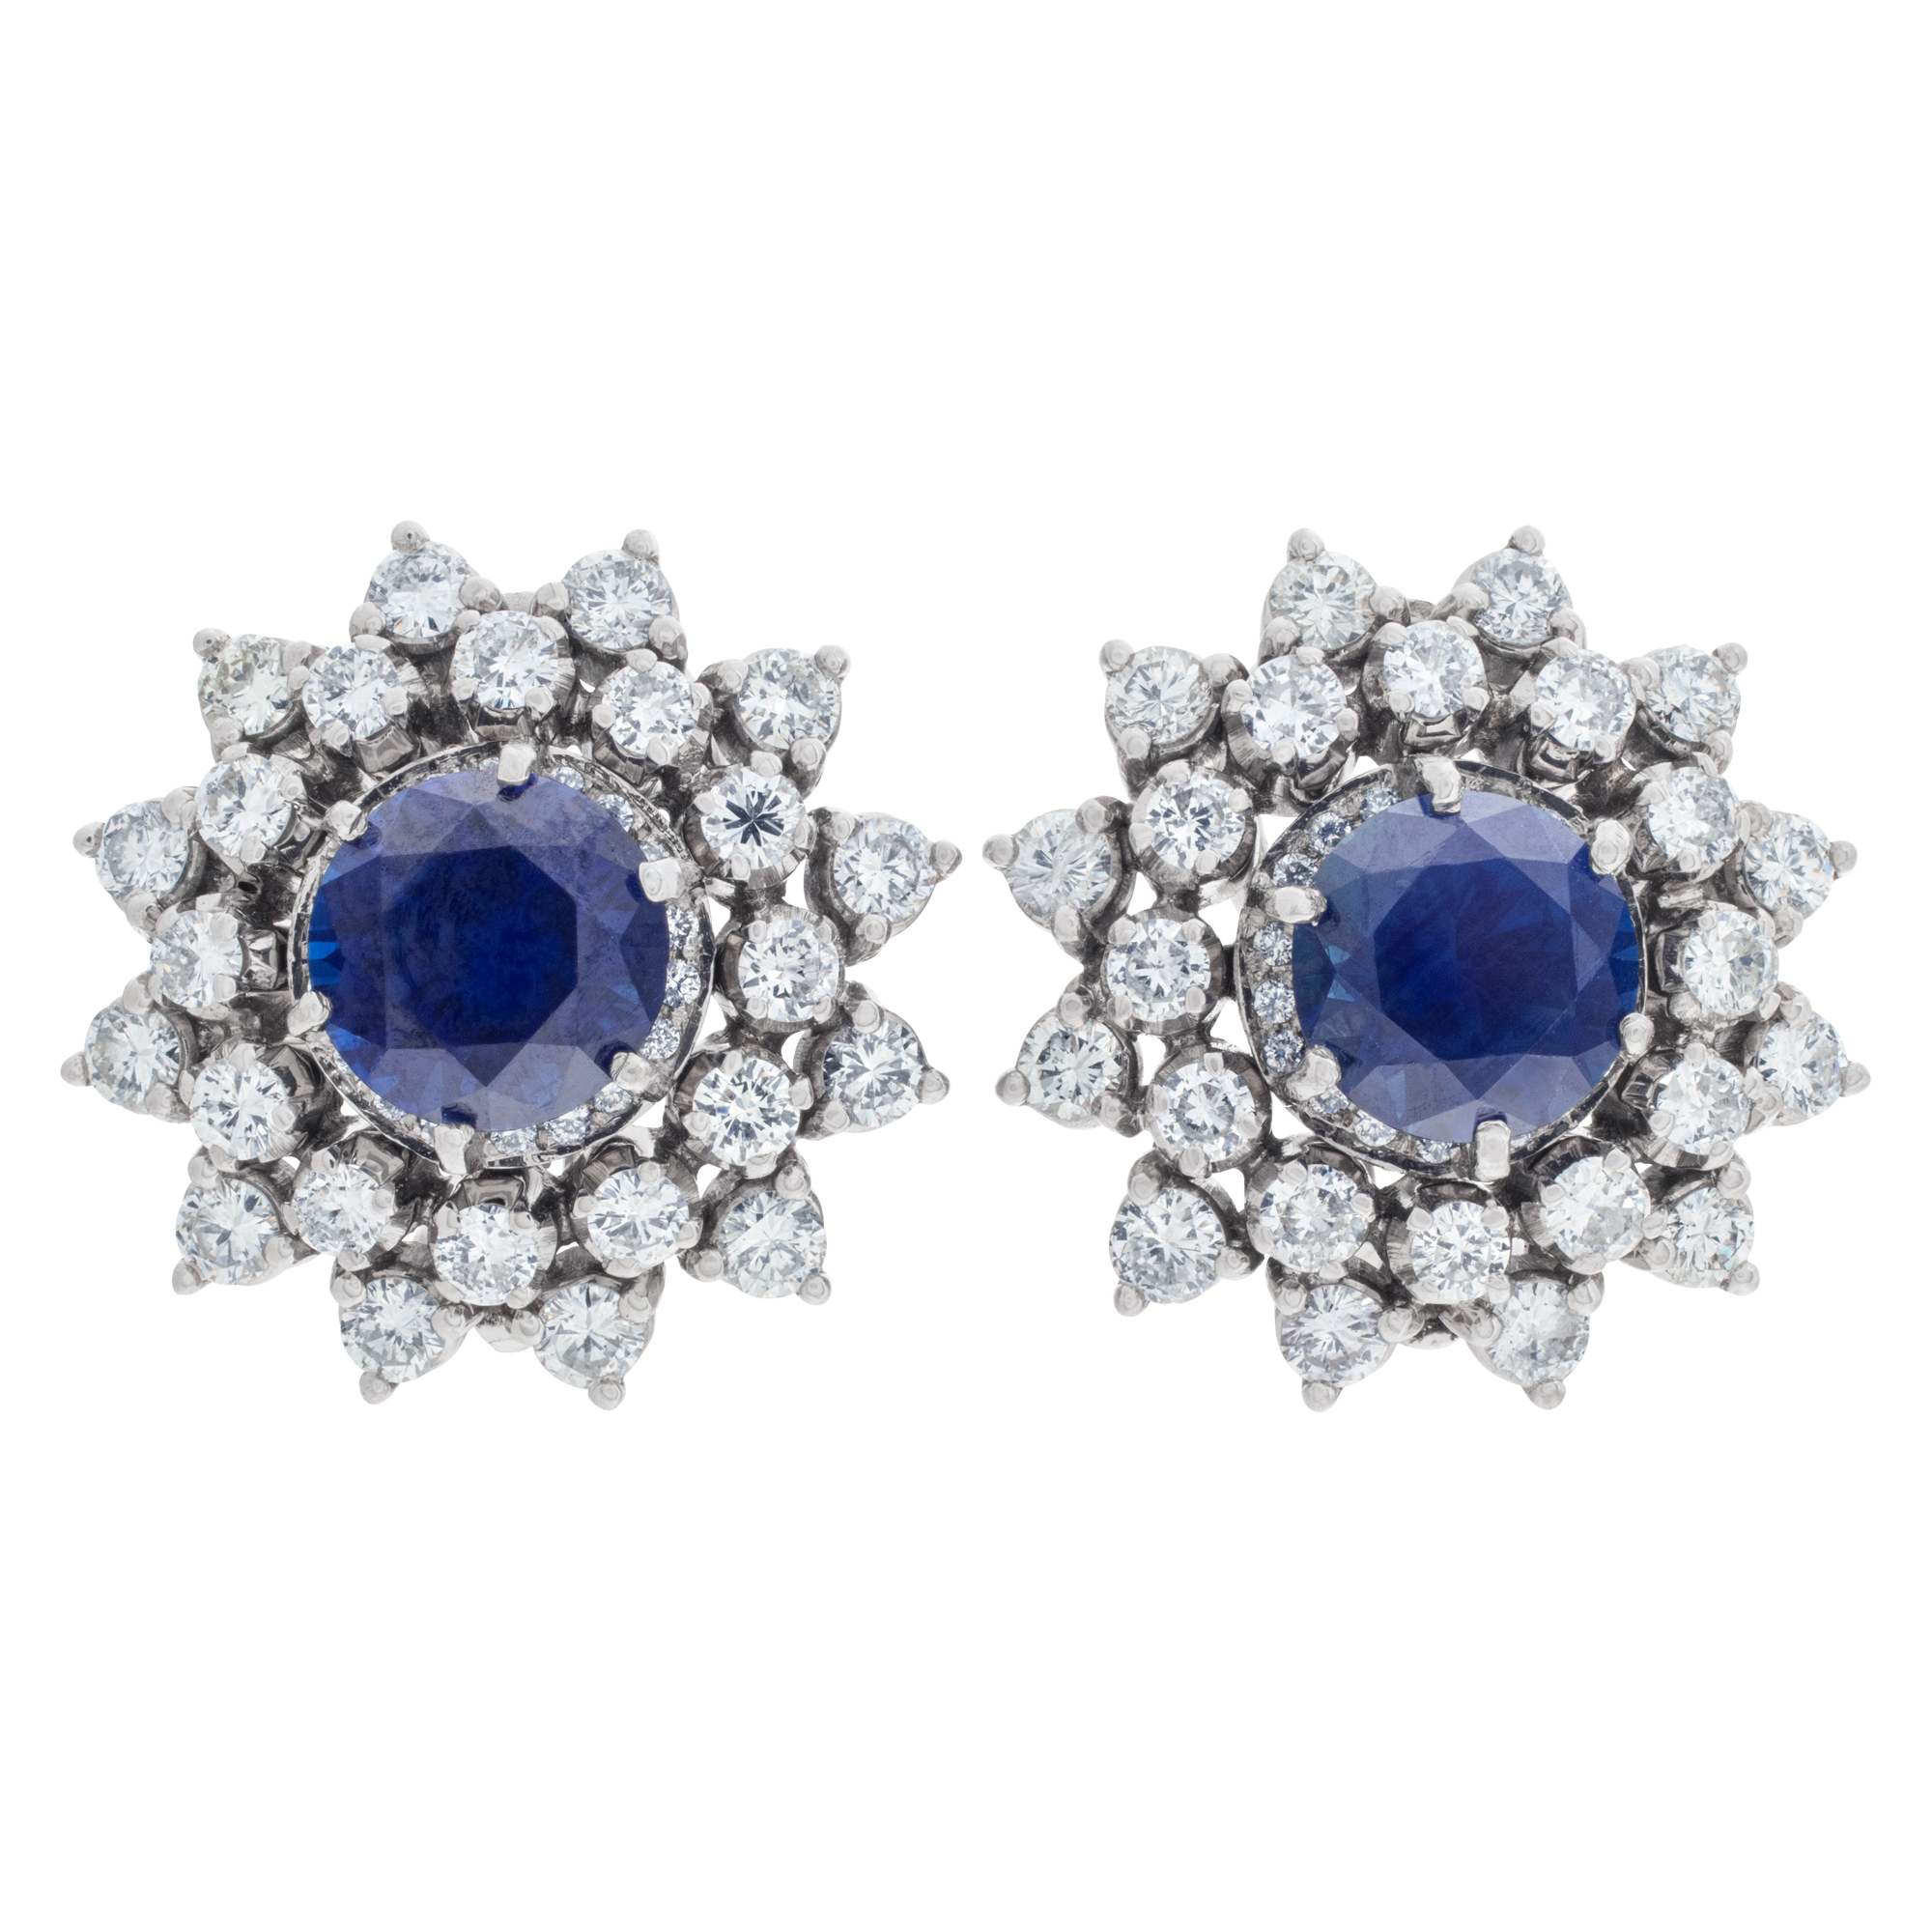 Classic Sapphire and diamond earrings set in 18k white gold (Stones)